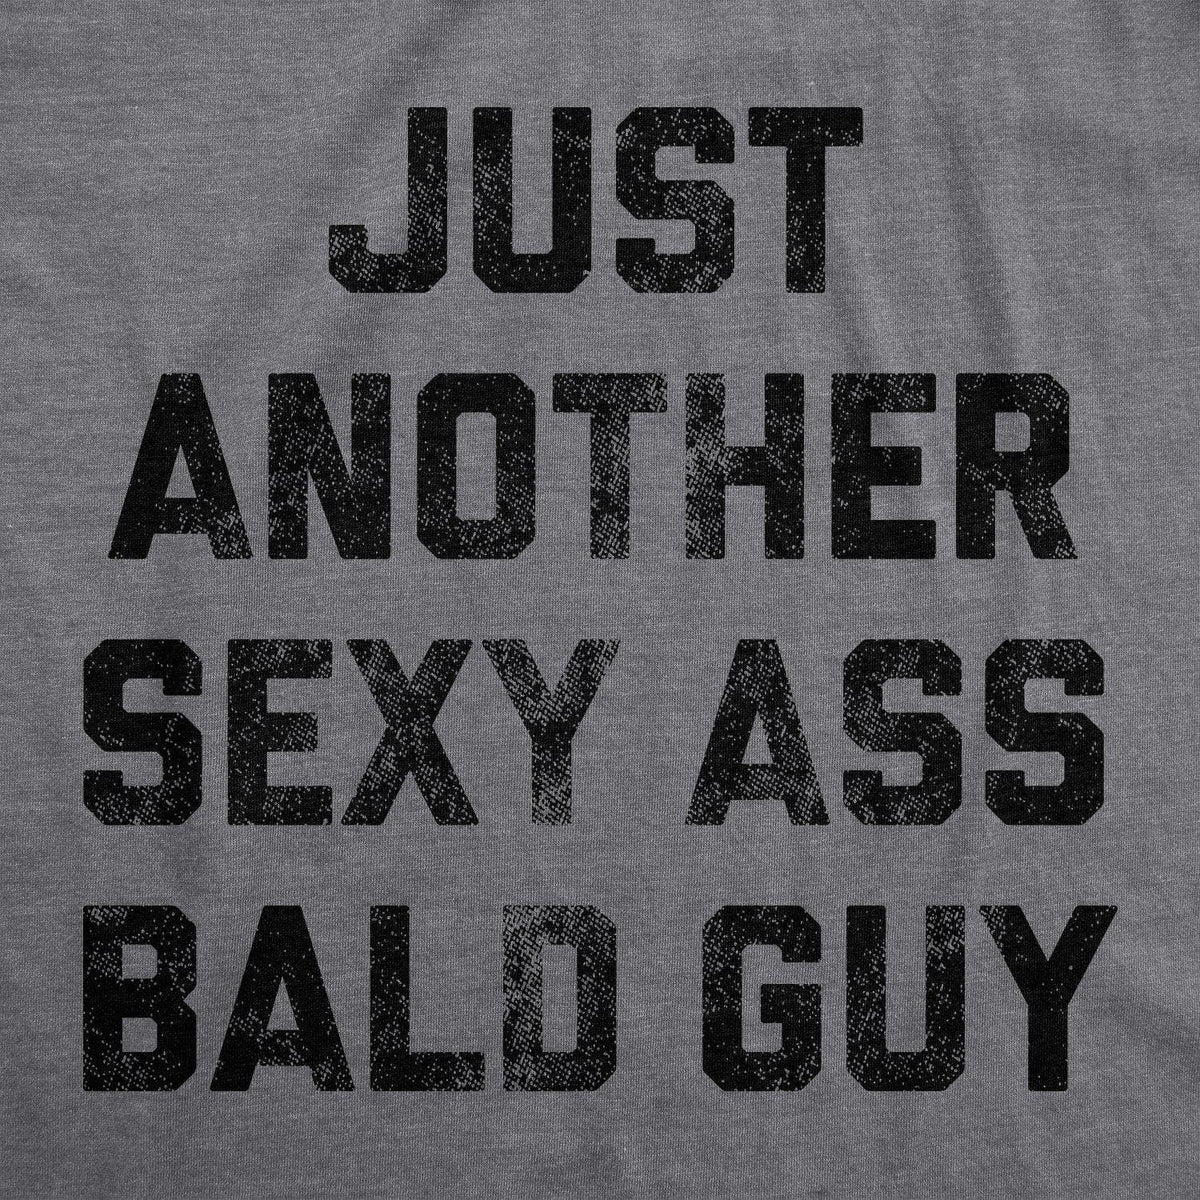 Just Another Sexy Bald Guy Men&#39;s Tshirt - Crazy Dog T-Shirts